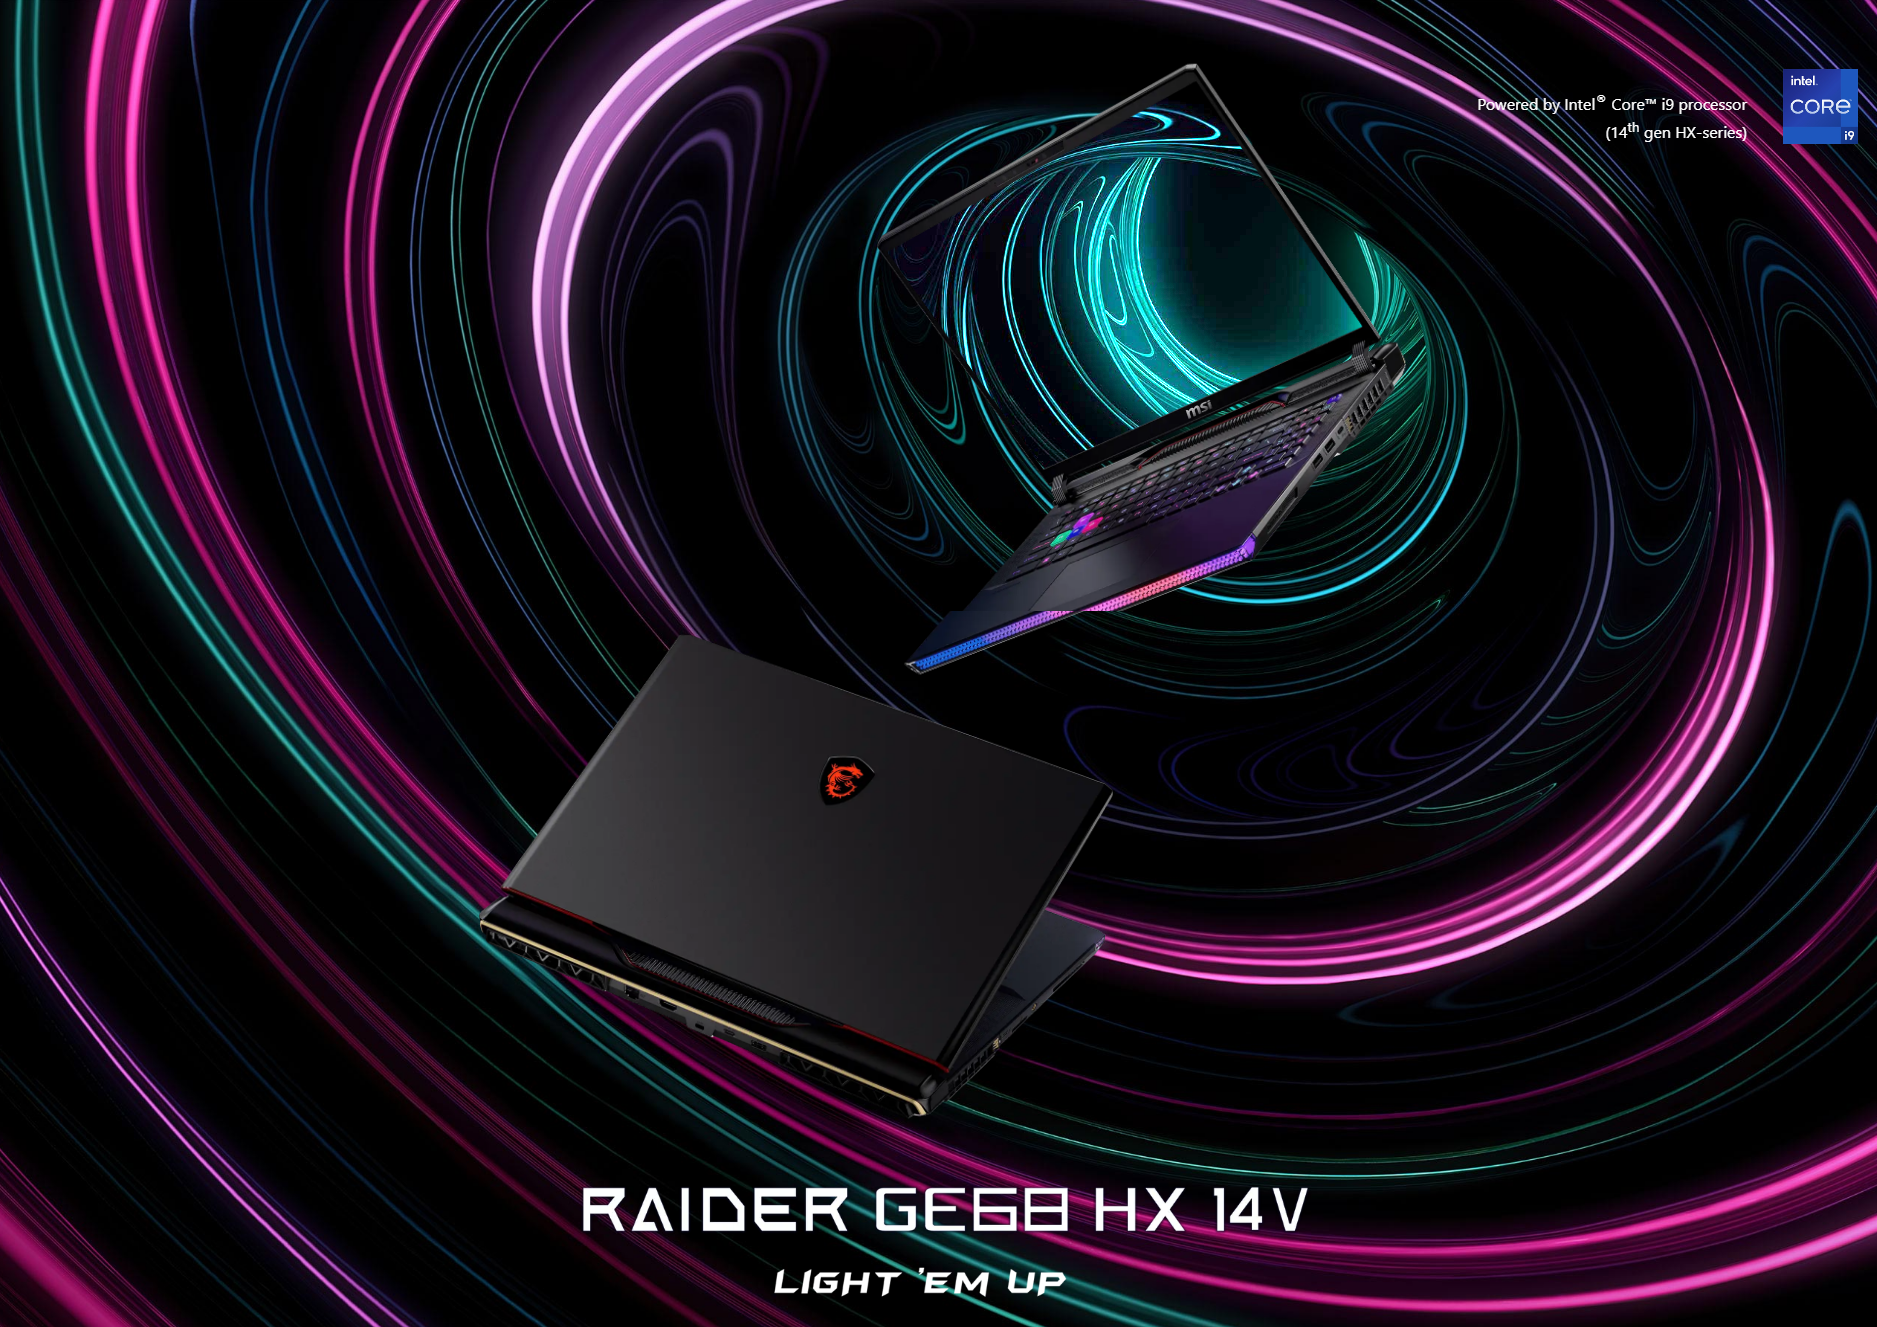 A large marketing image providing additional information about the product MSI Raider GE68 HX (14V) - 16" 120Hz, 14th Gen i9, RTX 4090, 32GB/2TB - Win 11 Gaming Notebook - Additional alt info not provided